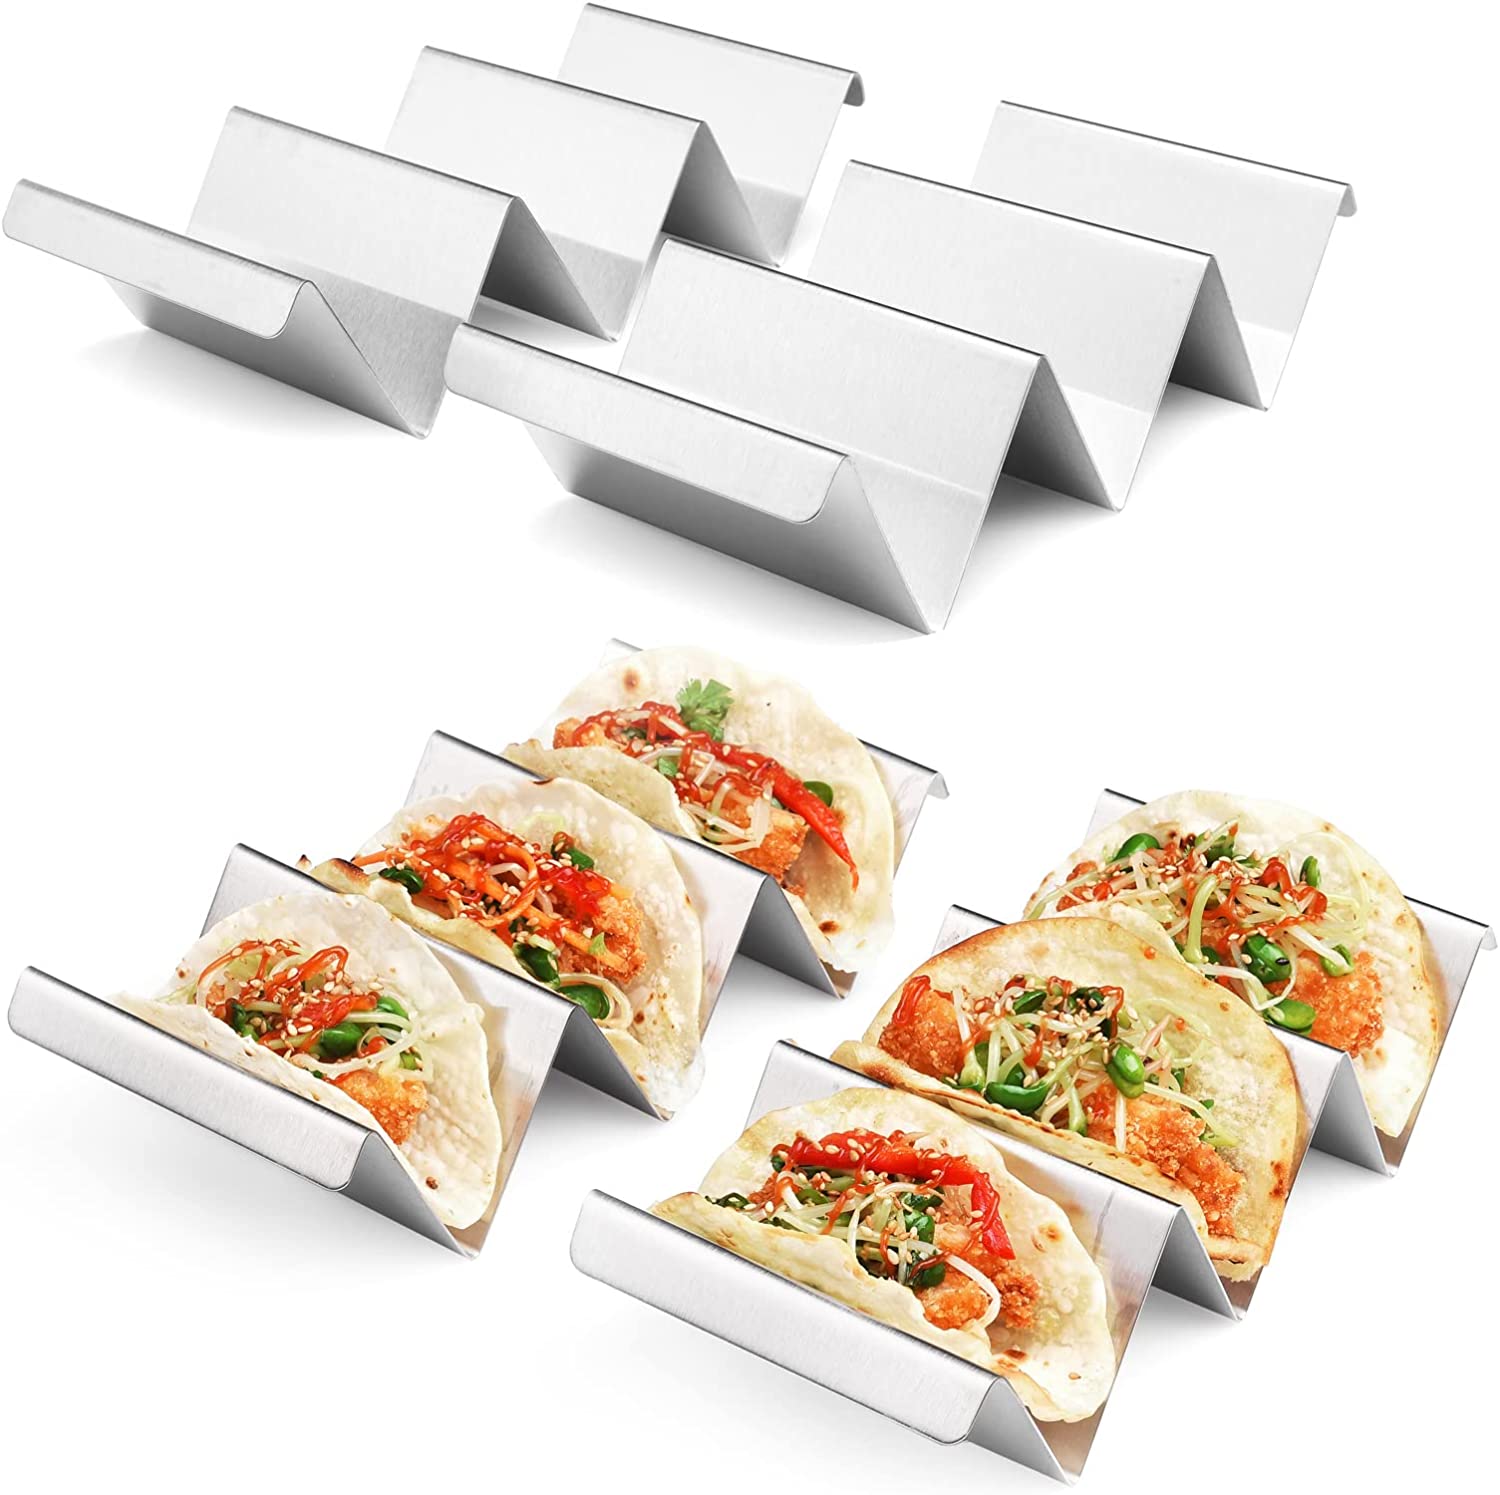 ARTTHOME Easy Clean Metal Taco Holders, 4-Pack